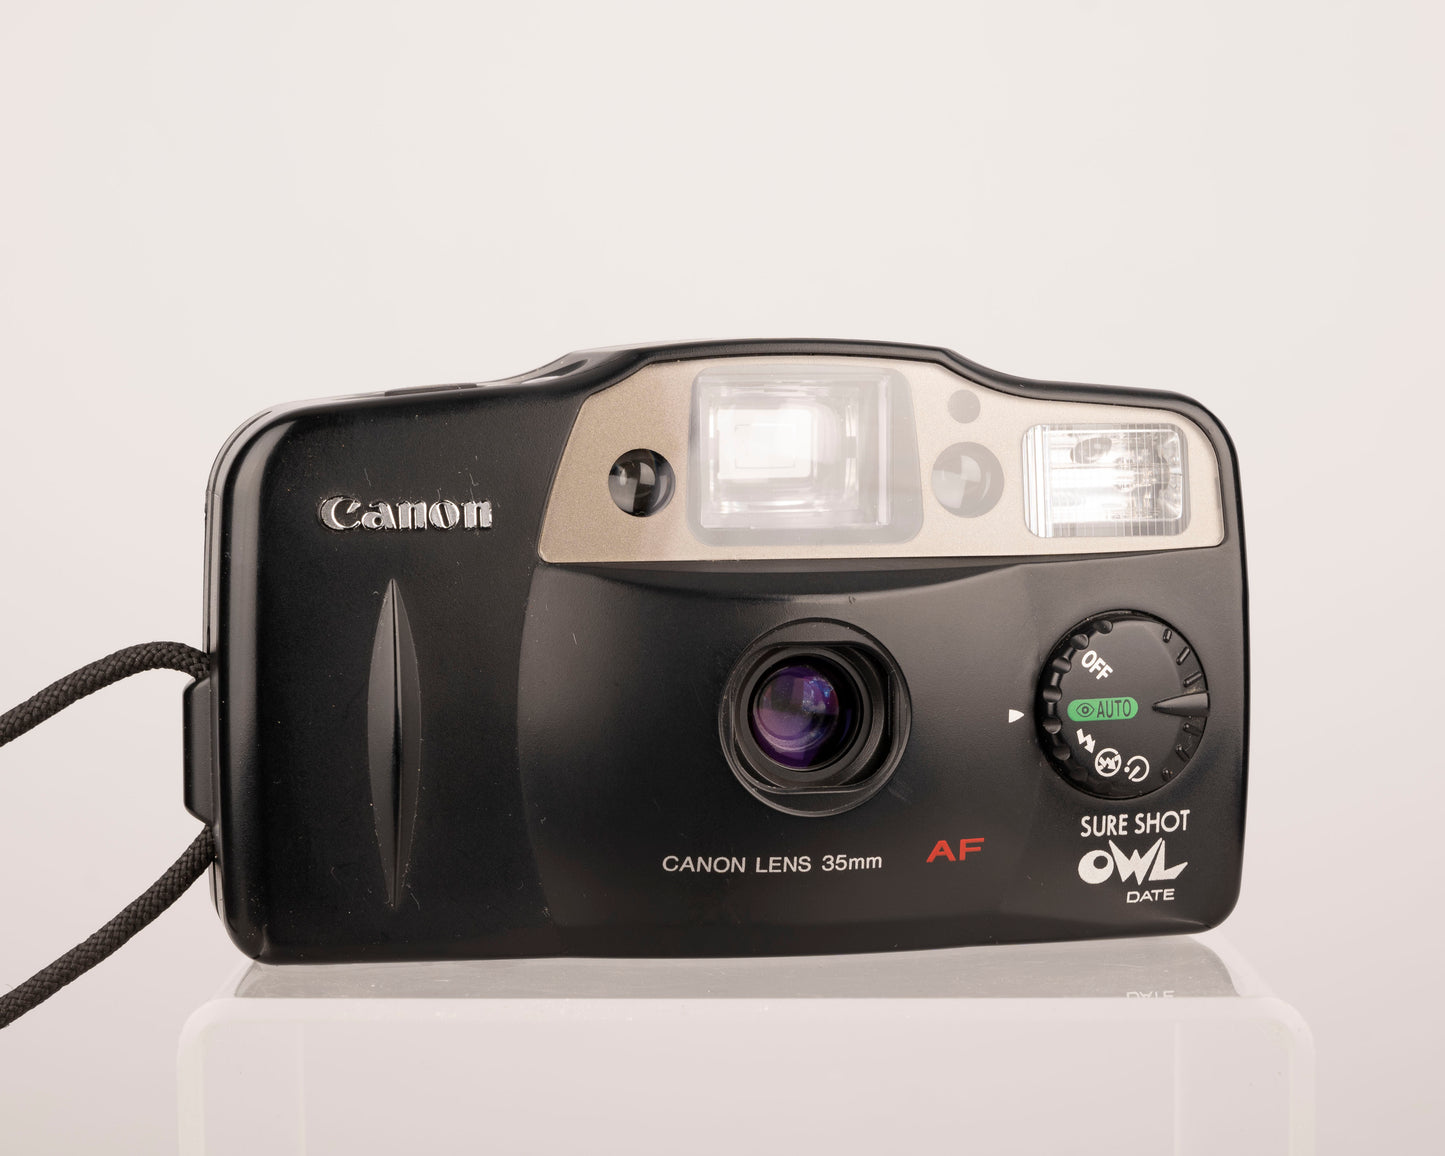 The Canon Sure Shot Owl is a very simple 35mm autofocus point-and-shoot camera from the late 1990s